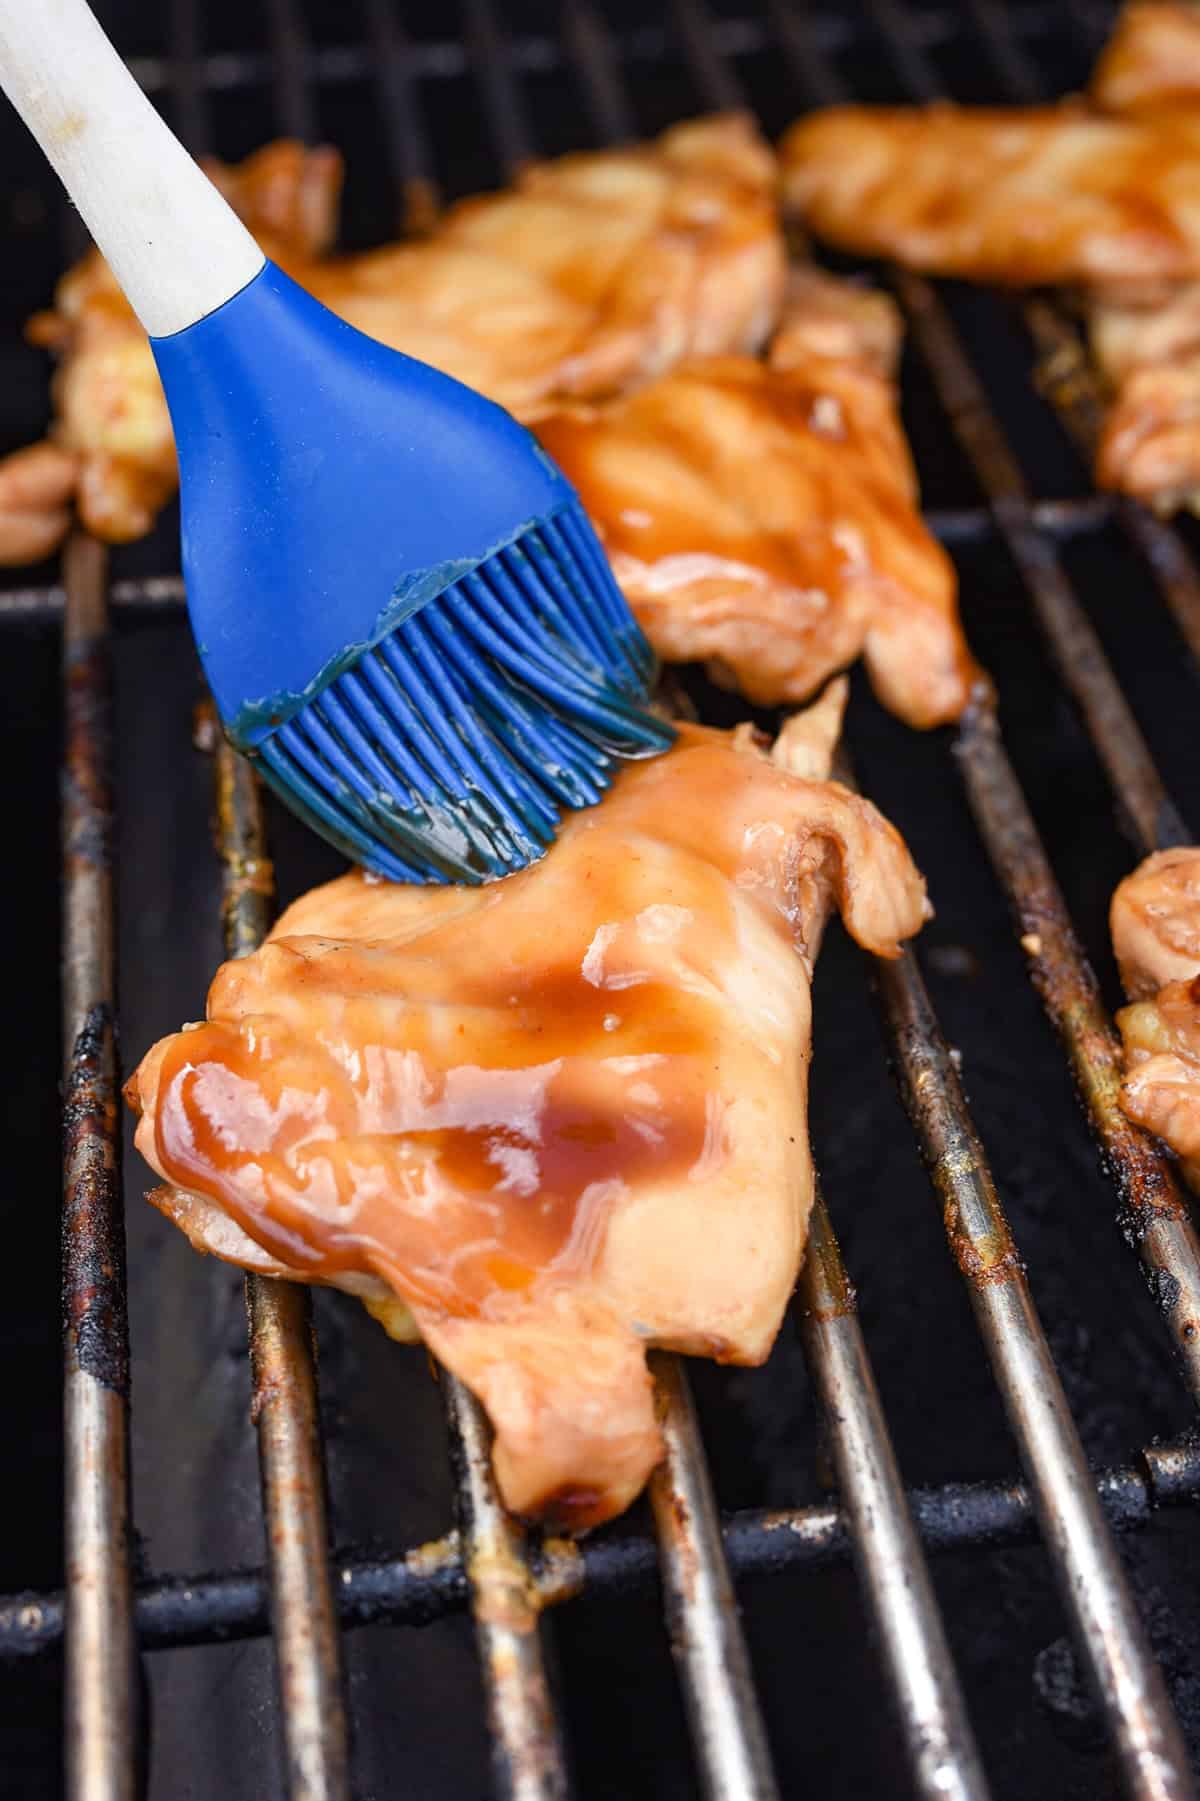 basting chicken on the grill with marinade